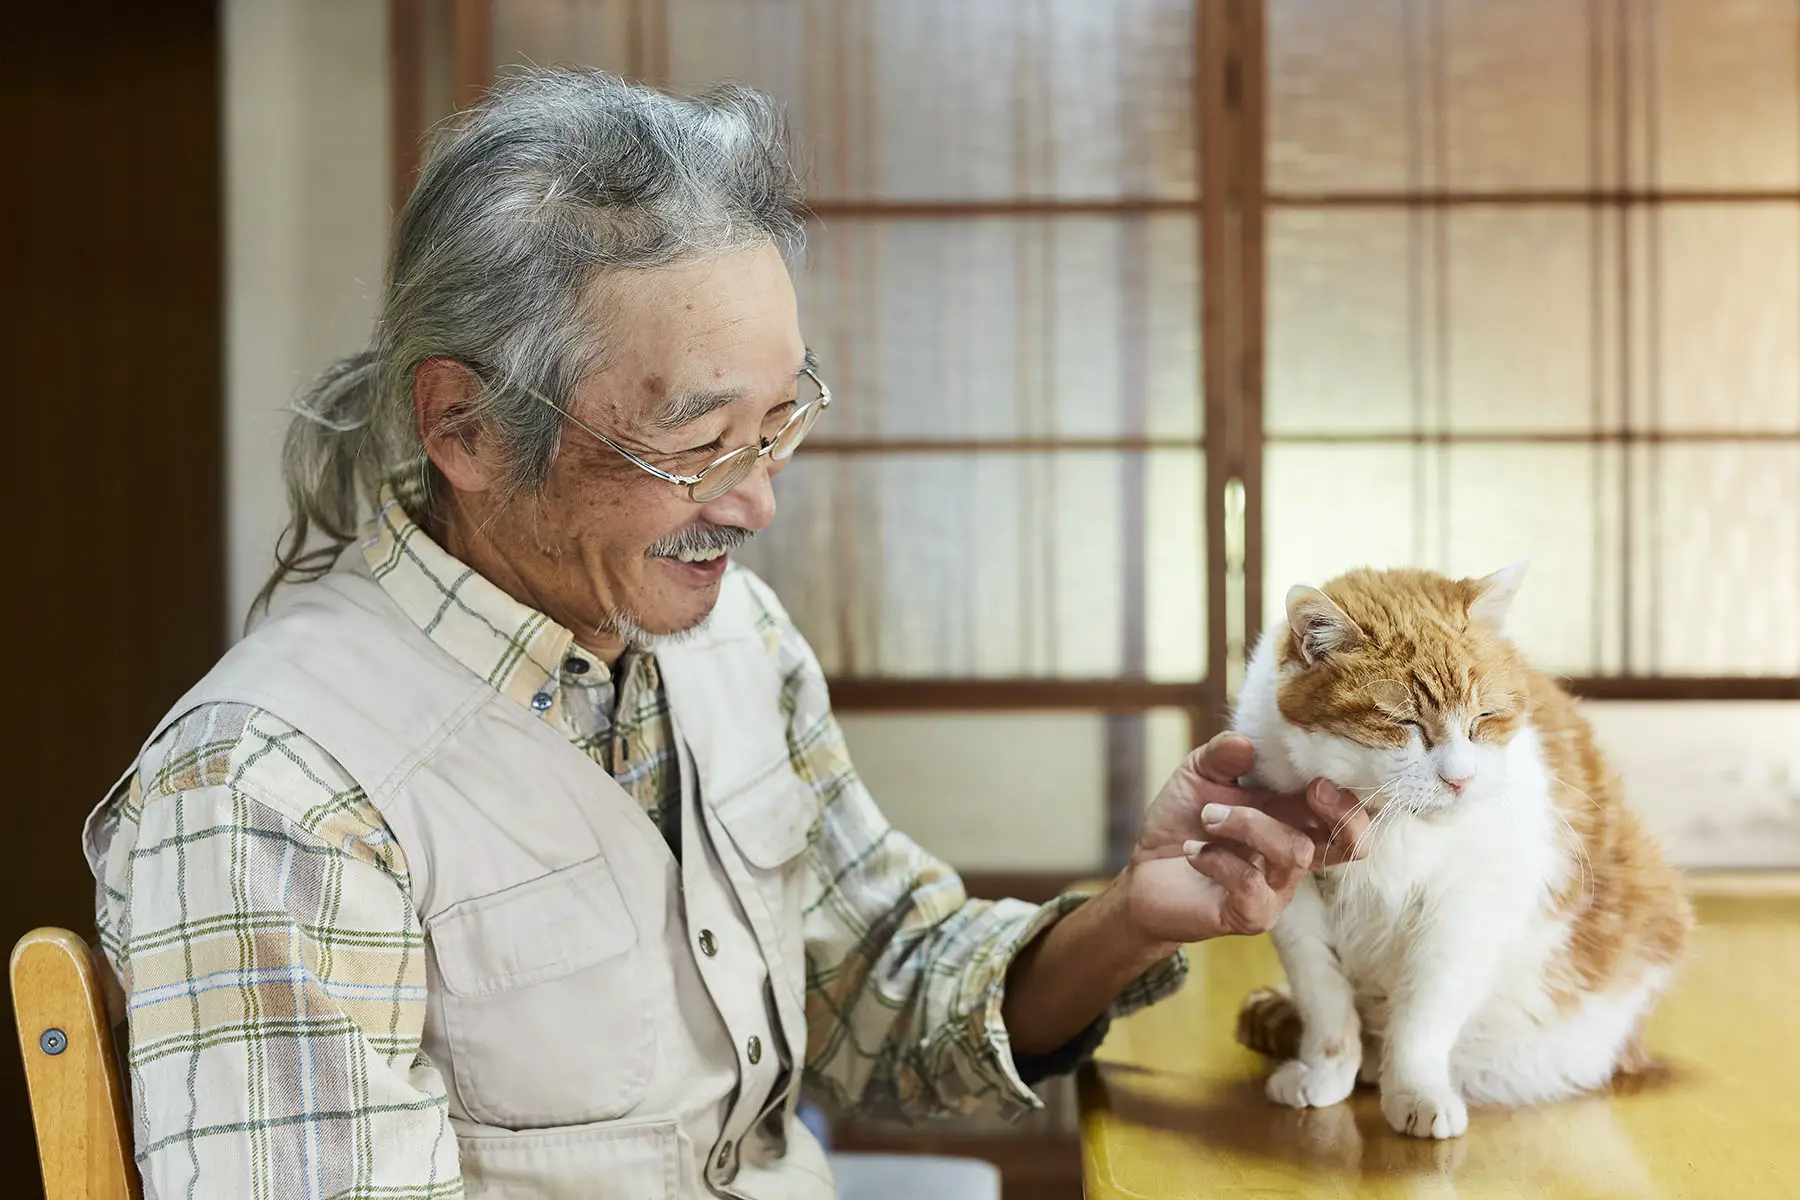 Smiling old man is petting his tabby cat.